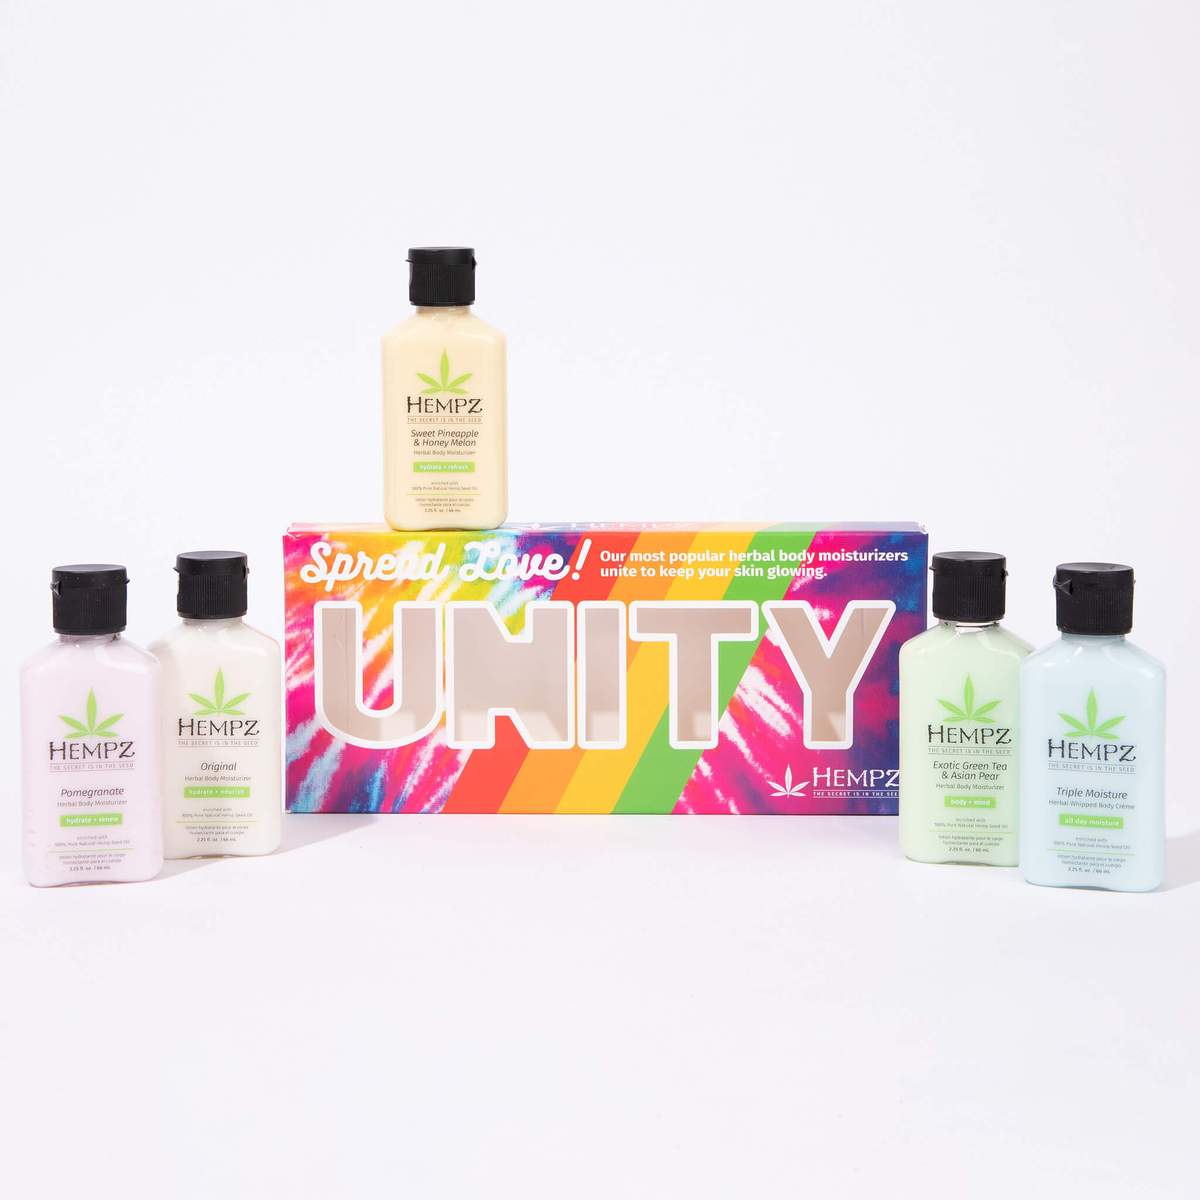 Hempz Unity Spread Love Mini Moisturizer Set-Hempz-BB_Lotion,BB_Moisturizers,Brand_Hempz,Collection_Bath and Body,Collection_Gifts,Gifts_Under 25,Hempz_ Gift Set,Hempz_Body Moisturizers,Hempz_Travel Size